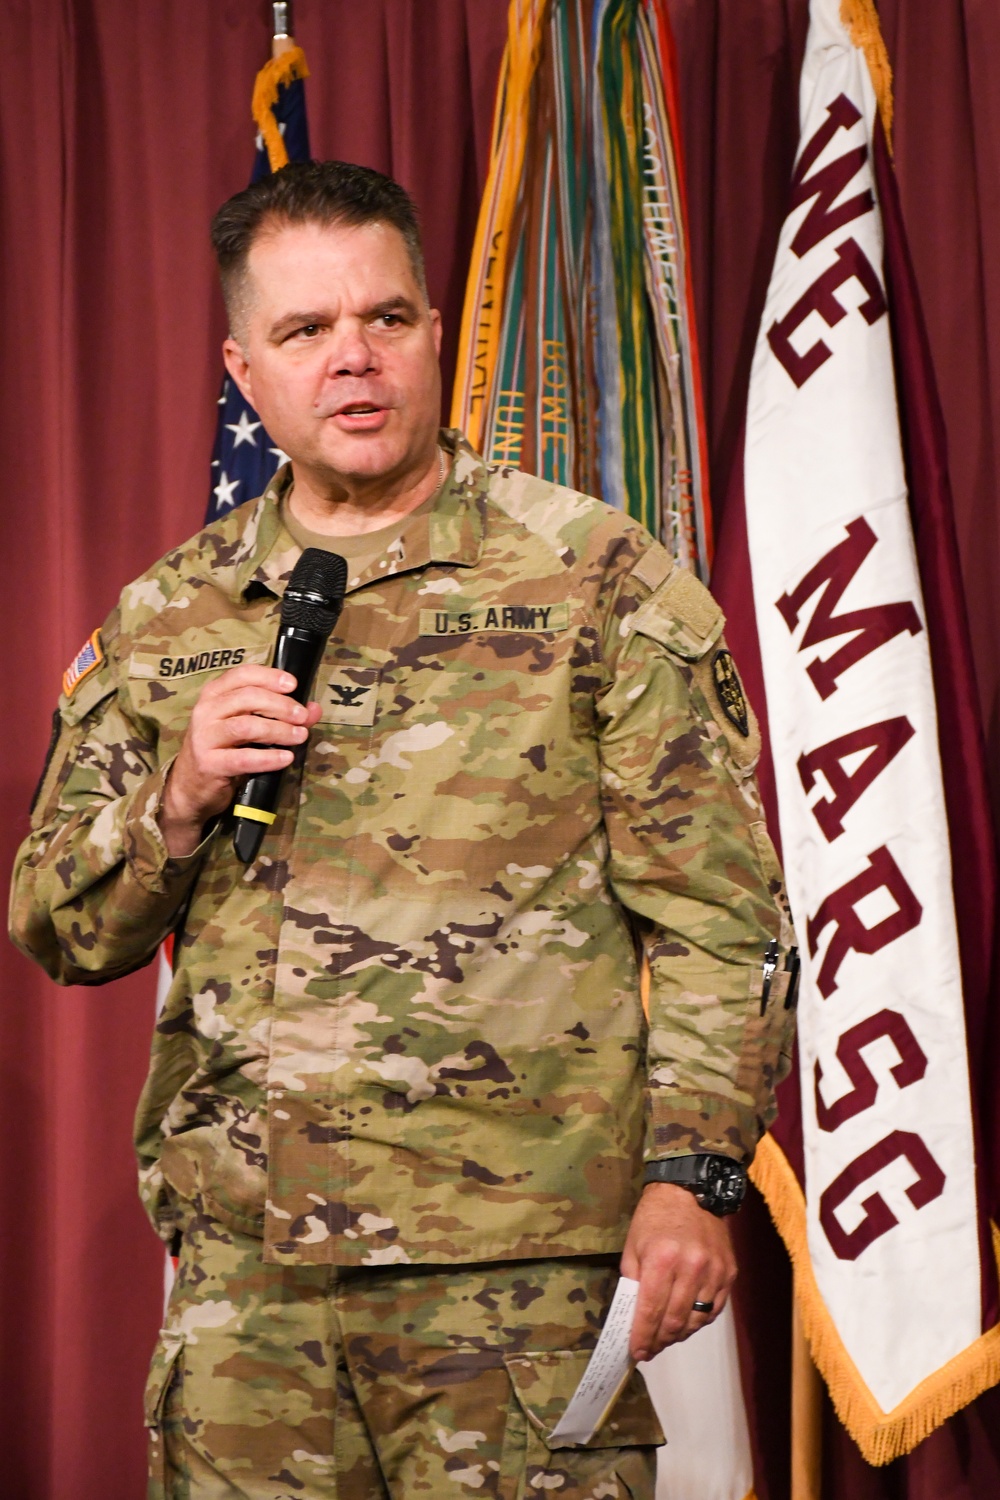 DVIDS - News - Army Reserve Col. Rodney Sanders Takes Command of